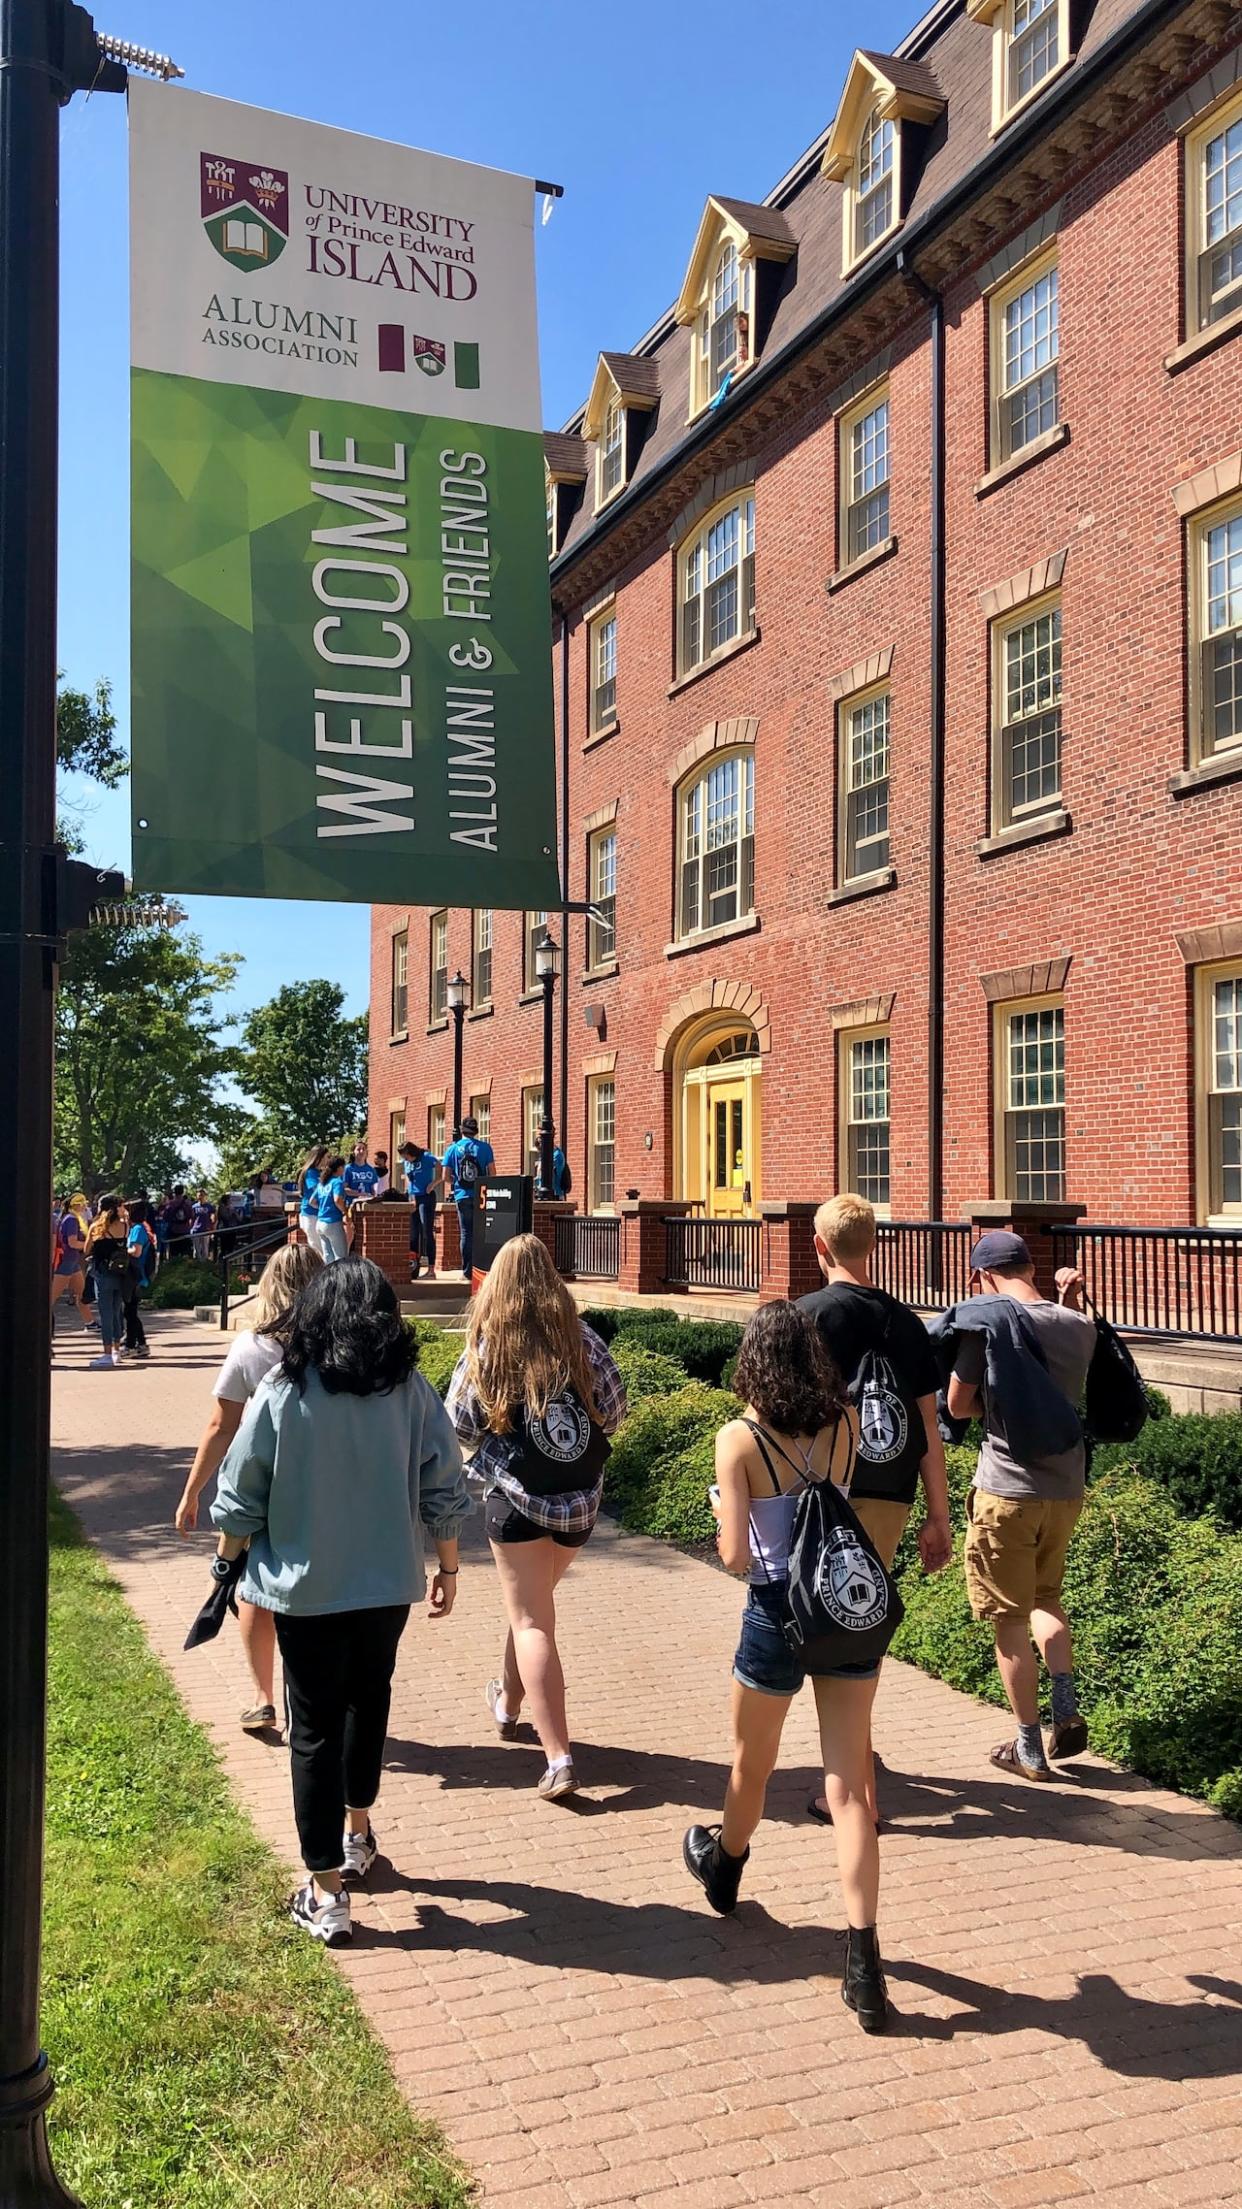 Starting in September, international students will be able to work off-campus for up to 24 hours per week while they're enrolled in classes. (Jane Robertson/CBC - image credit)